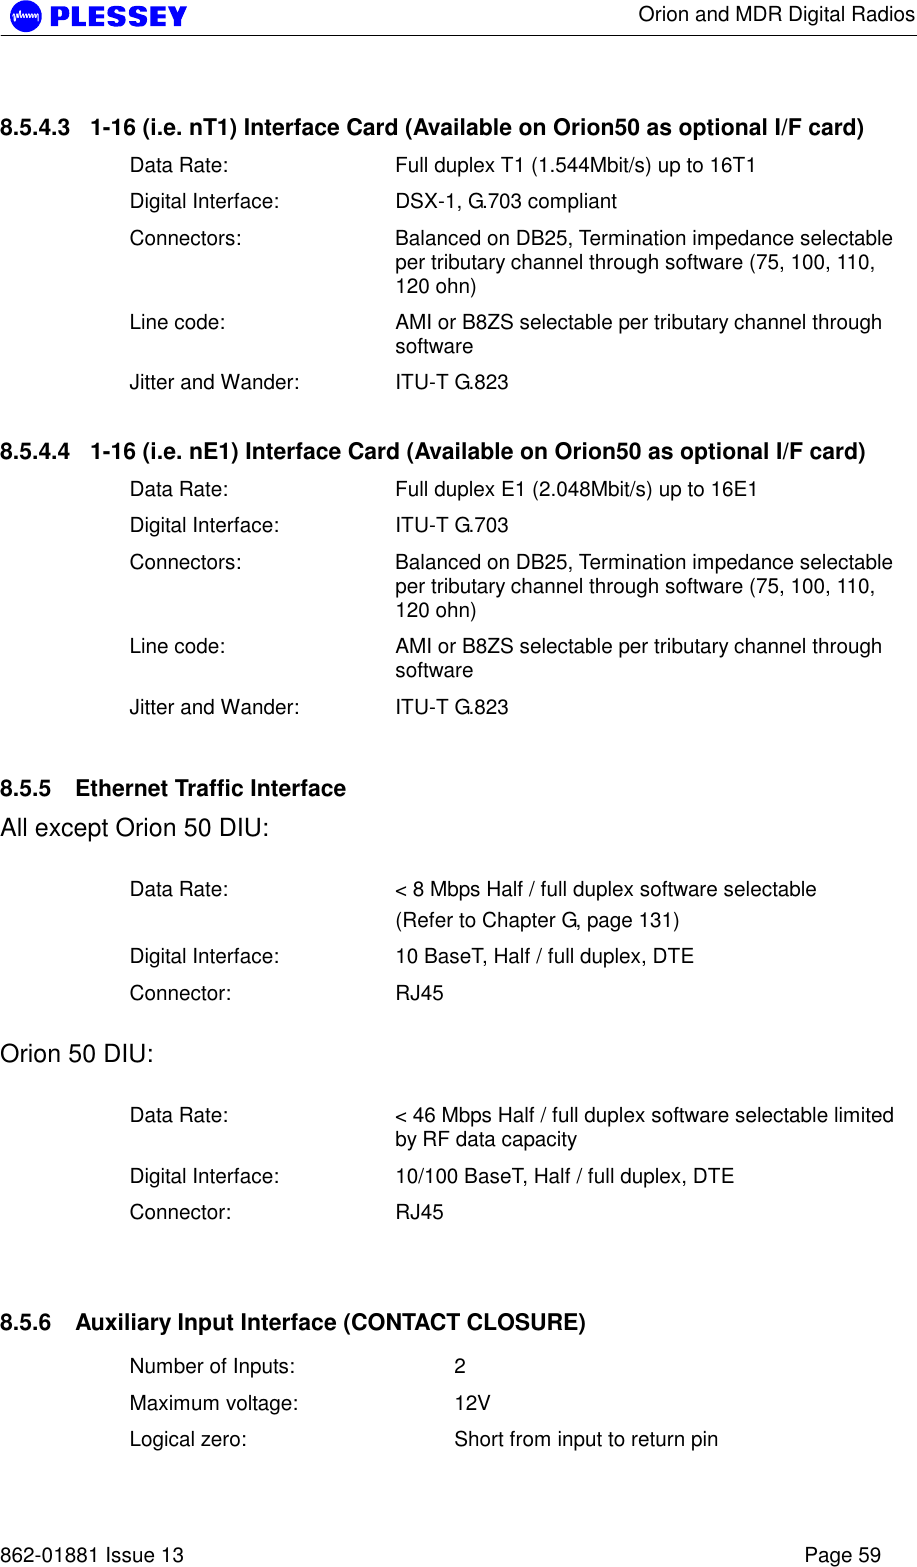      Orion and MDR Digital Radios   862-01881 Issue 13    Page 59 8.5.4.3  1-16 (i.e. nT1) Interface Card (Available on Orion50 as optional I/F card) Data Rate:  Full duplex T1 (1.544Mbit/s) up to 16T1 Digital Interface:  DSX-1, G.703 compliant Connectors:  Balanced on DB25, Termination impedance selectable per tributary channel through software (75, 100, 110, 120 ohn) Line code:  AMI or B8ZS selectable per tributary channel through software Jitter and Wander:  ITU-T G.823 8.5.4.4  1-16 (i.e. nE1) Interface Card (Available on Orion50 as optional I/F card) Data Rate:  Full duplex E1 (2.048Mbit/s) up to 16E1 Digital Interface:  ITU-T G.703 Connectors:  Balanced on DB25, Termination impedance selectable per tributary channel through software (75, 100, 110, 120 ohn) Line code:  AMI or B8ZS selectable per tributary channel through software Jitter and Wander:  ITU-T G.823 8.5.5  Ethernet Traffic Interface All except Orion 50 DIU:  Data Rate:  &lt; 8 Mbps Half / full duplex software selectable (Refer to Chapter G, page 131) Digital Interface:  10 BaseT, Half / full duplex, DTE Connector: RJ45  Orion 50 DIU:  Data Rate:  &lt; 46 Mbps Half / full duplex software selectable limited by RF data capacity Digital Interface:  10/100 BaseT, Half / full duplex, DTE Connector: RJ45  8.5.6  Auxiliary Input Interface (CONTACT CLOSURE) Number of Inputs:  2 Maximum voltage:  12V Logical zero:  Short from input to return pin 